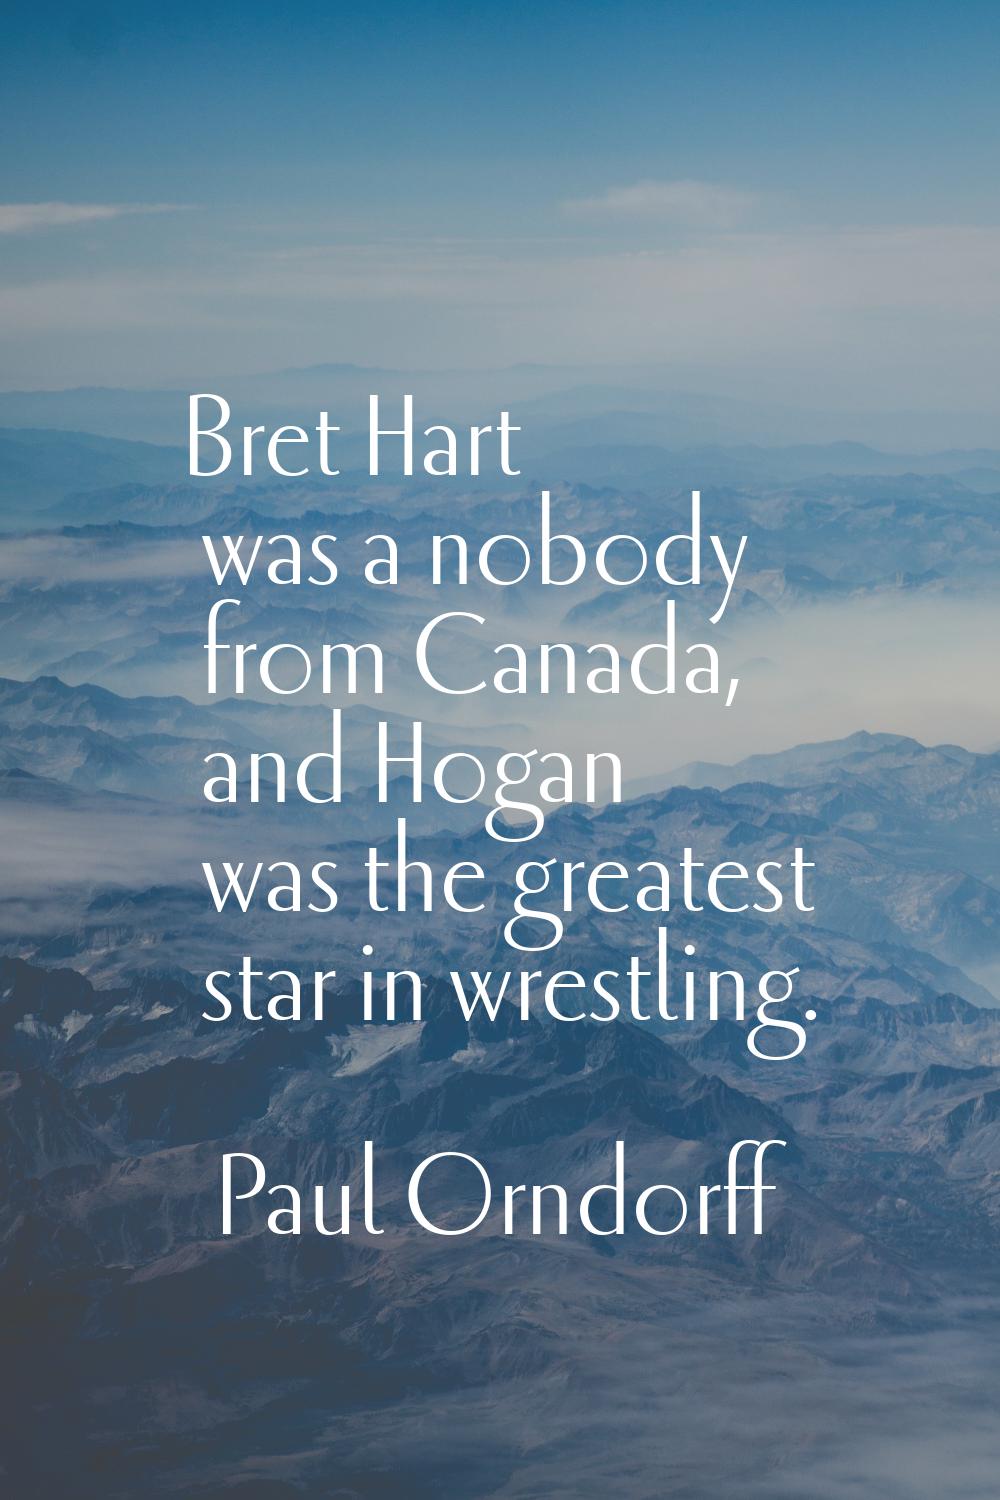 Bret Hart was a nobody from Canada, and Hogan was the greatest star in wrestling.